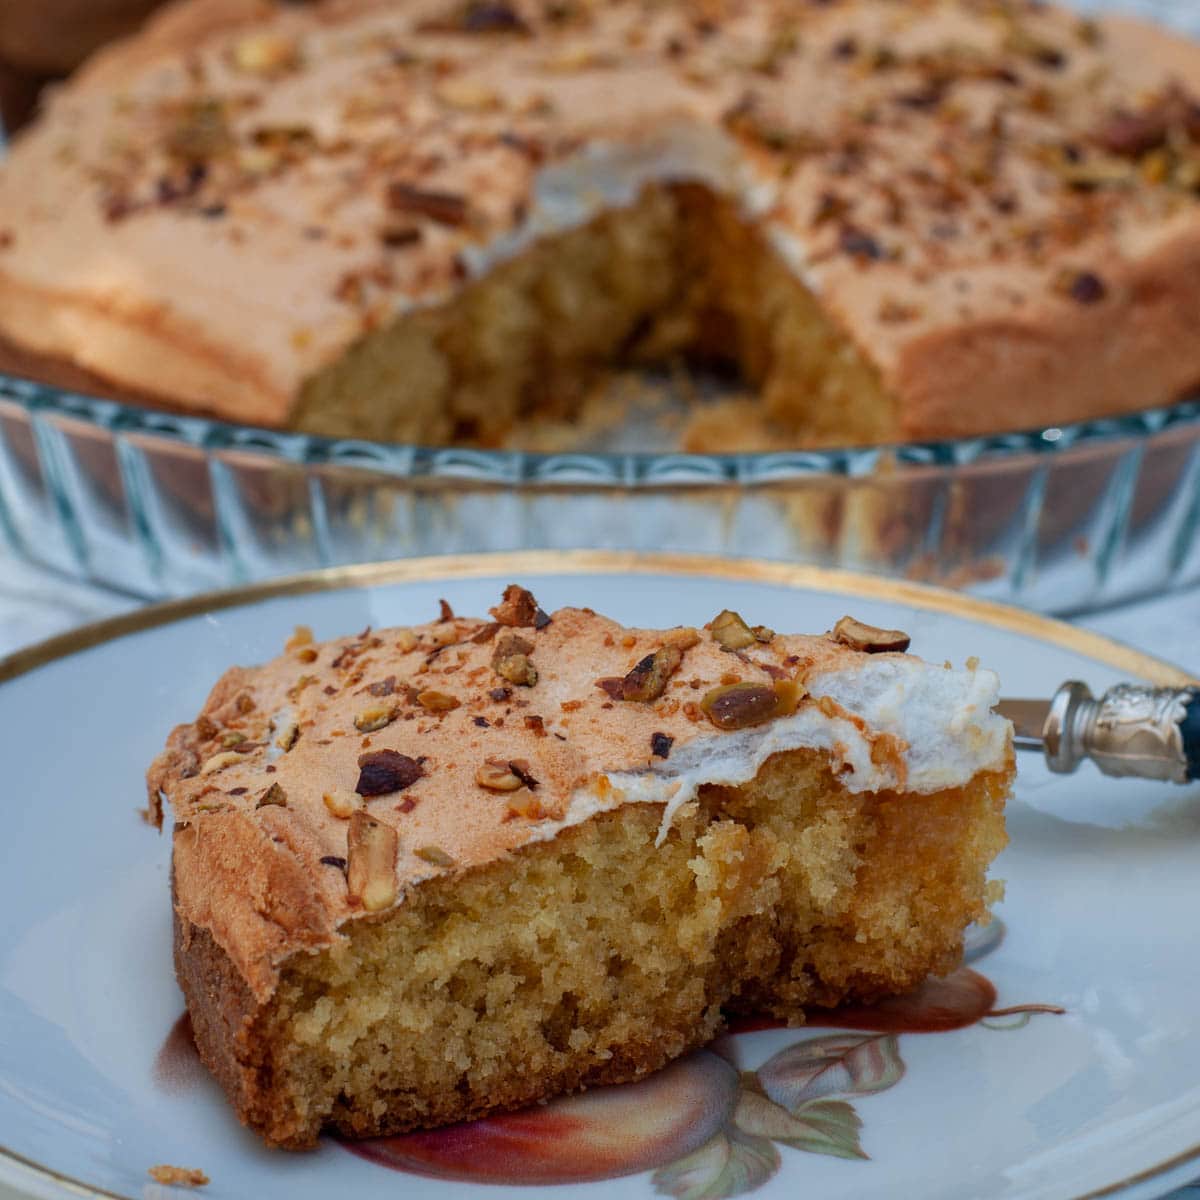 Apricot jam cake with marshmallow